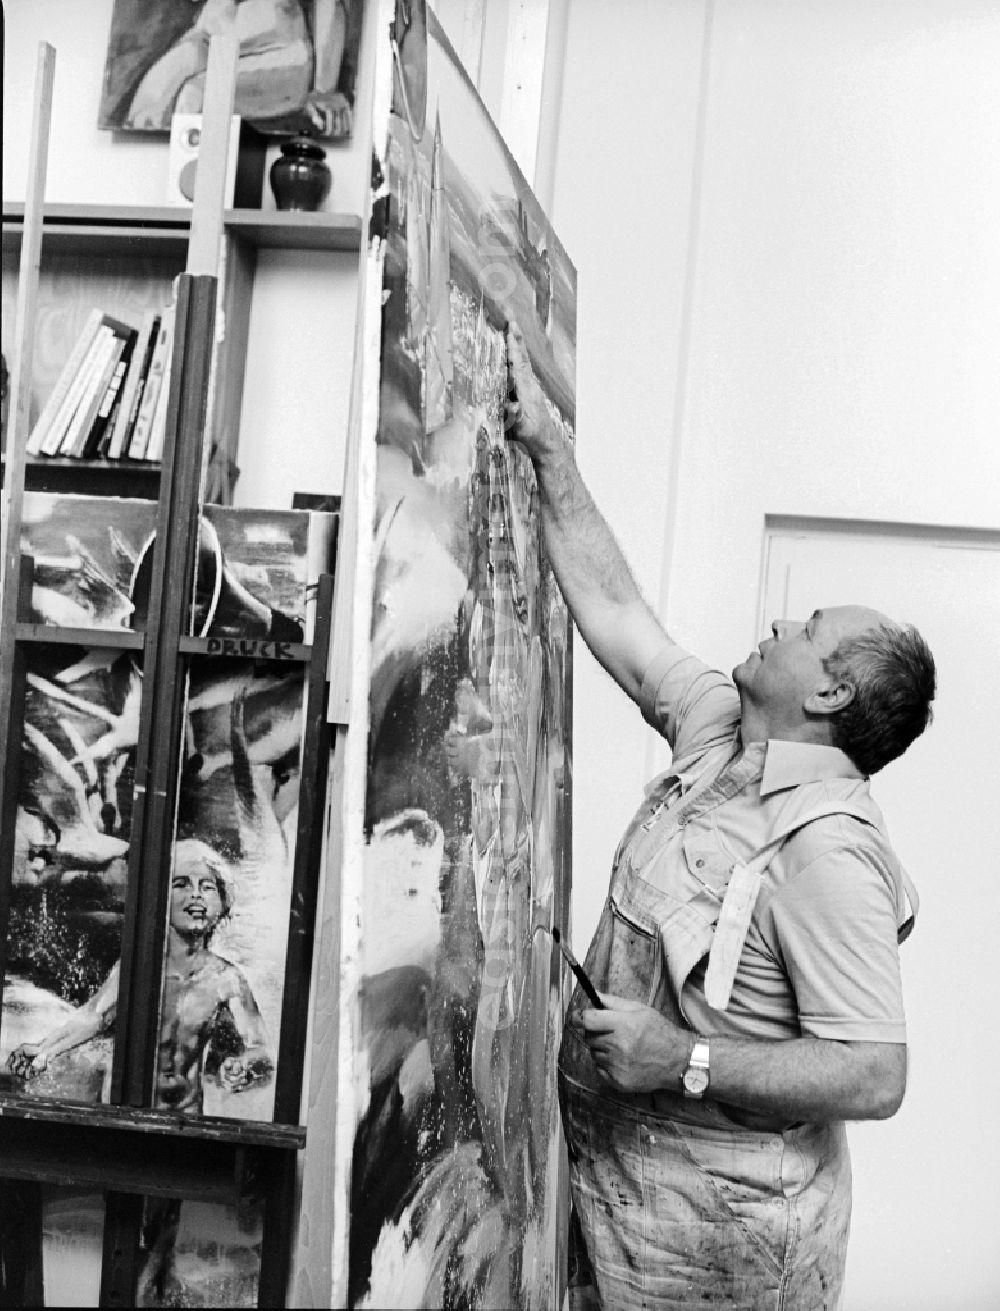 GDR picture archive: Berlin - Professor Walter Womacka in his studio in Berlin-Mitte on Fisherman's Island. Womacka was considered one of the most outstanding representatives of socialist realism, his art continues to shape the face of East Berlin. He directed twenty years as rector of the Art Academy Berlin-Weissensee